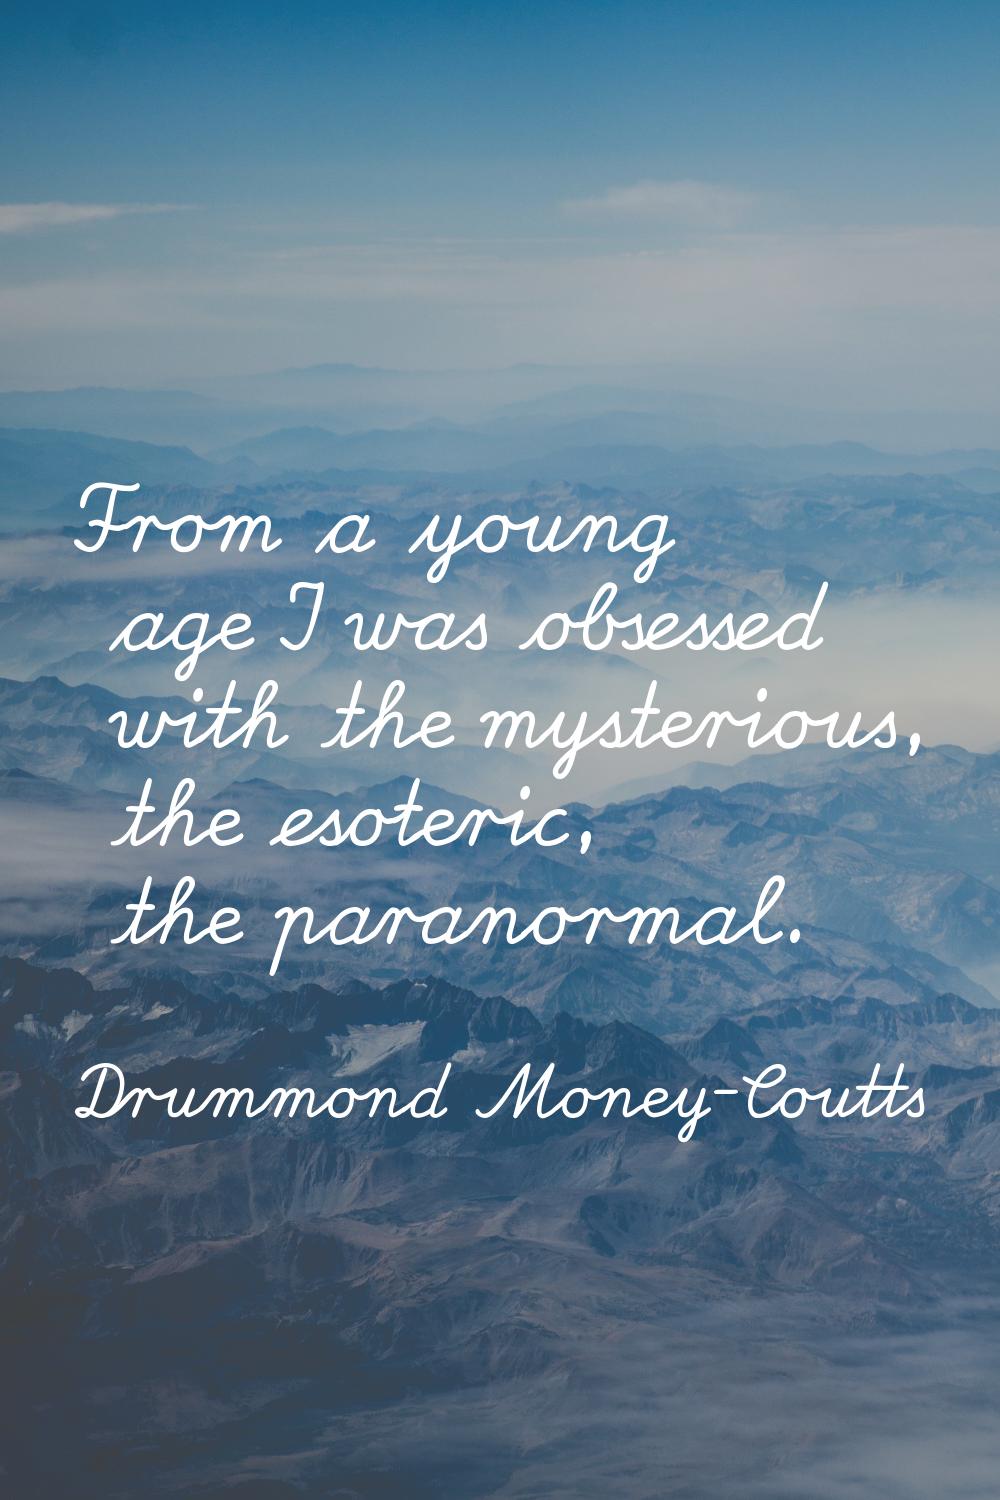 From a young age I was obsessed with the mysterious, the esoteric, the paranormal.